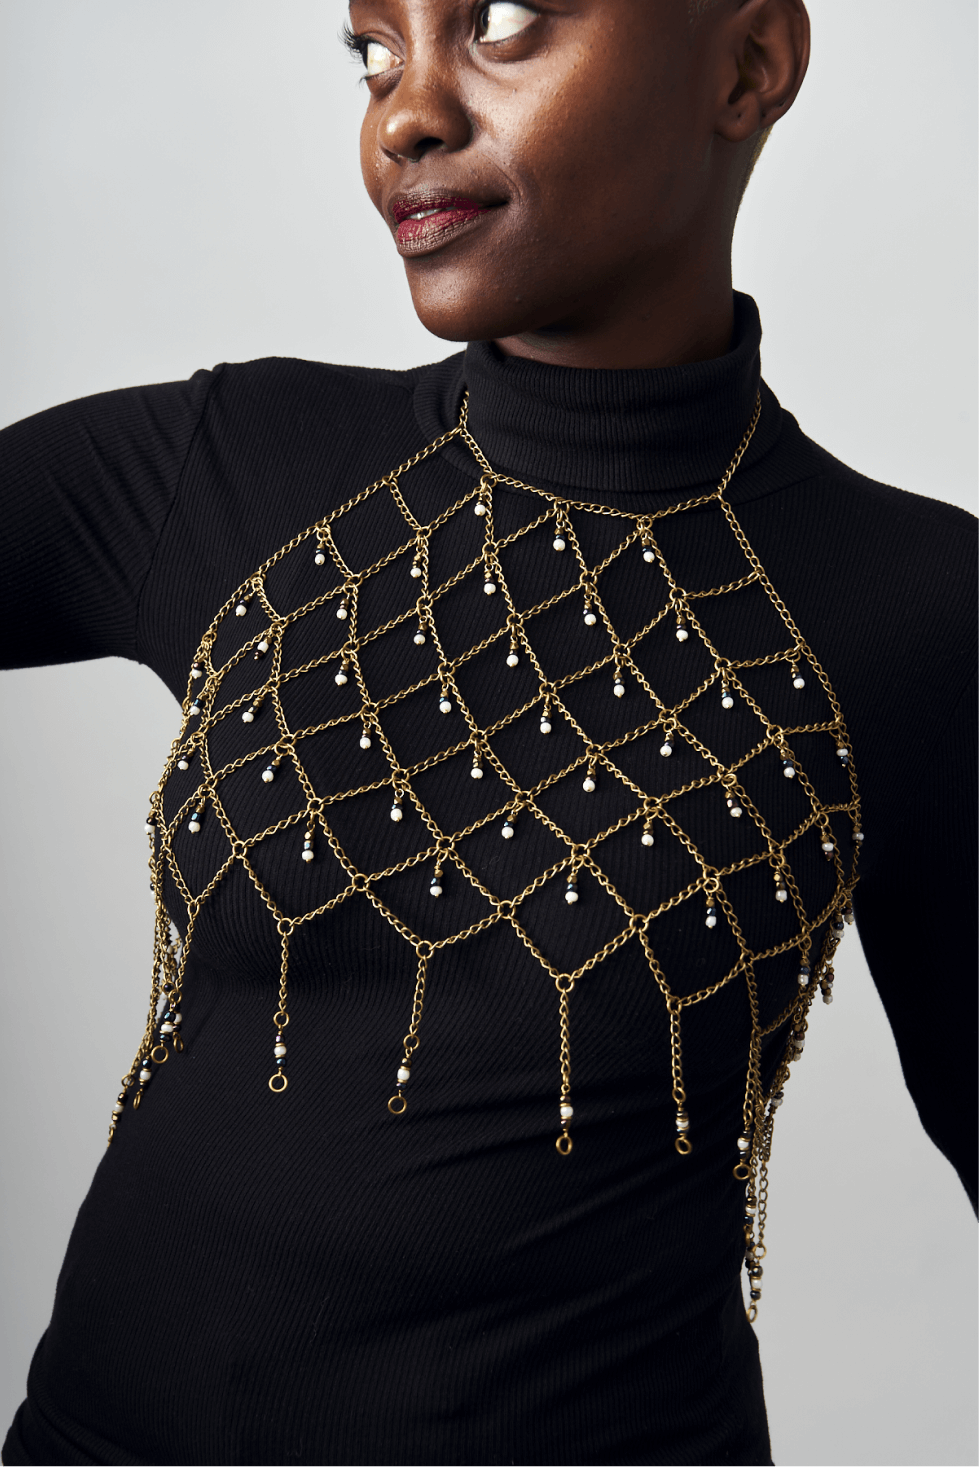 Shop Halter Mesh Brass Top by Tiger Tail Twister on Arrai. Discover stylish, affordable clothing, jewelry, handbags and unique handmade pieces from top Kenyan & African fashion brands prioritising sustainability and quality craftsmanship.